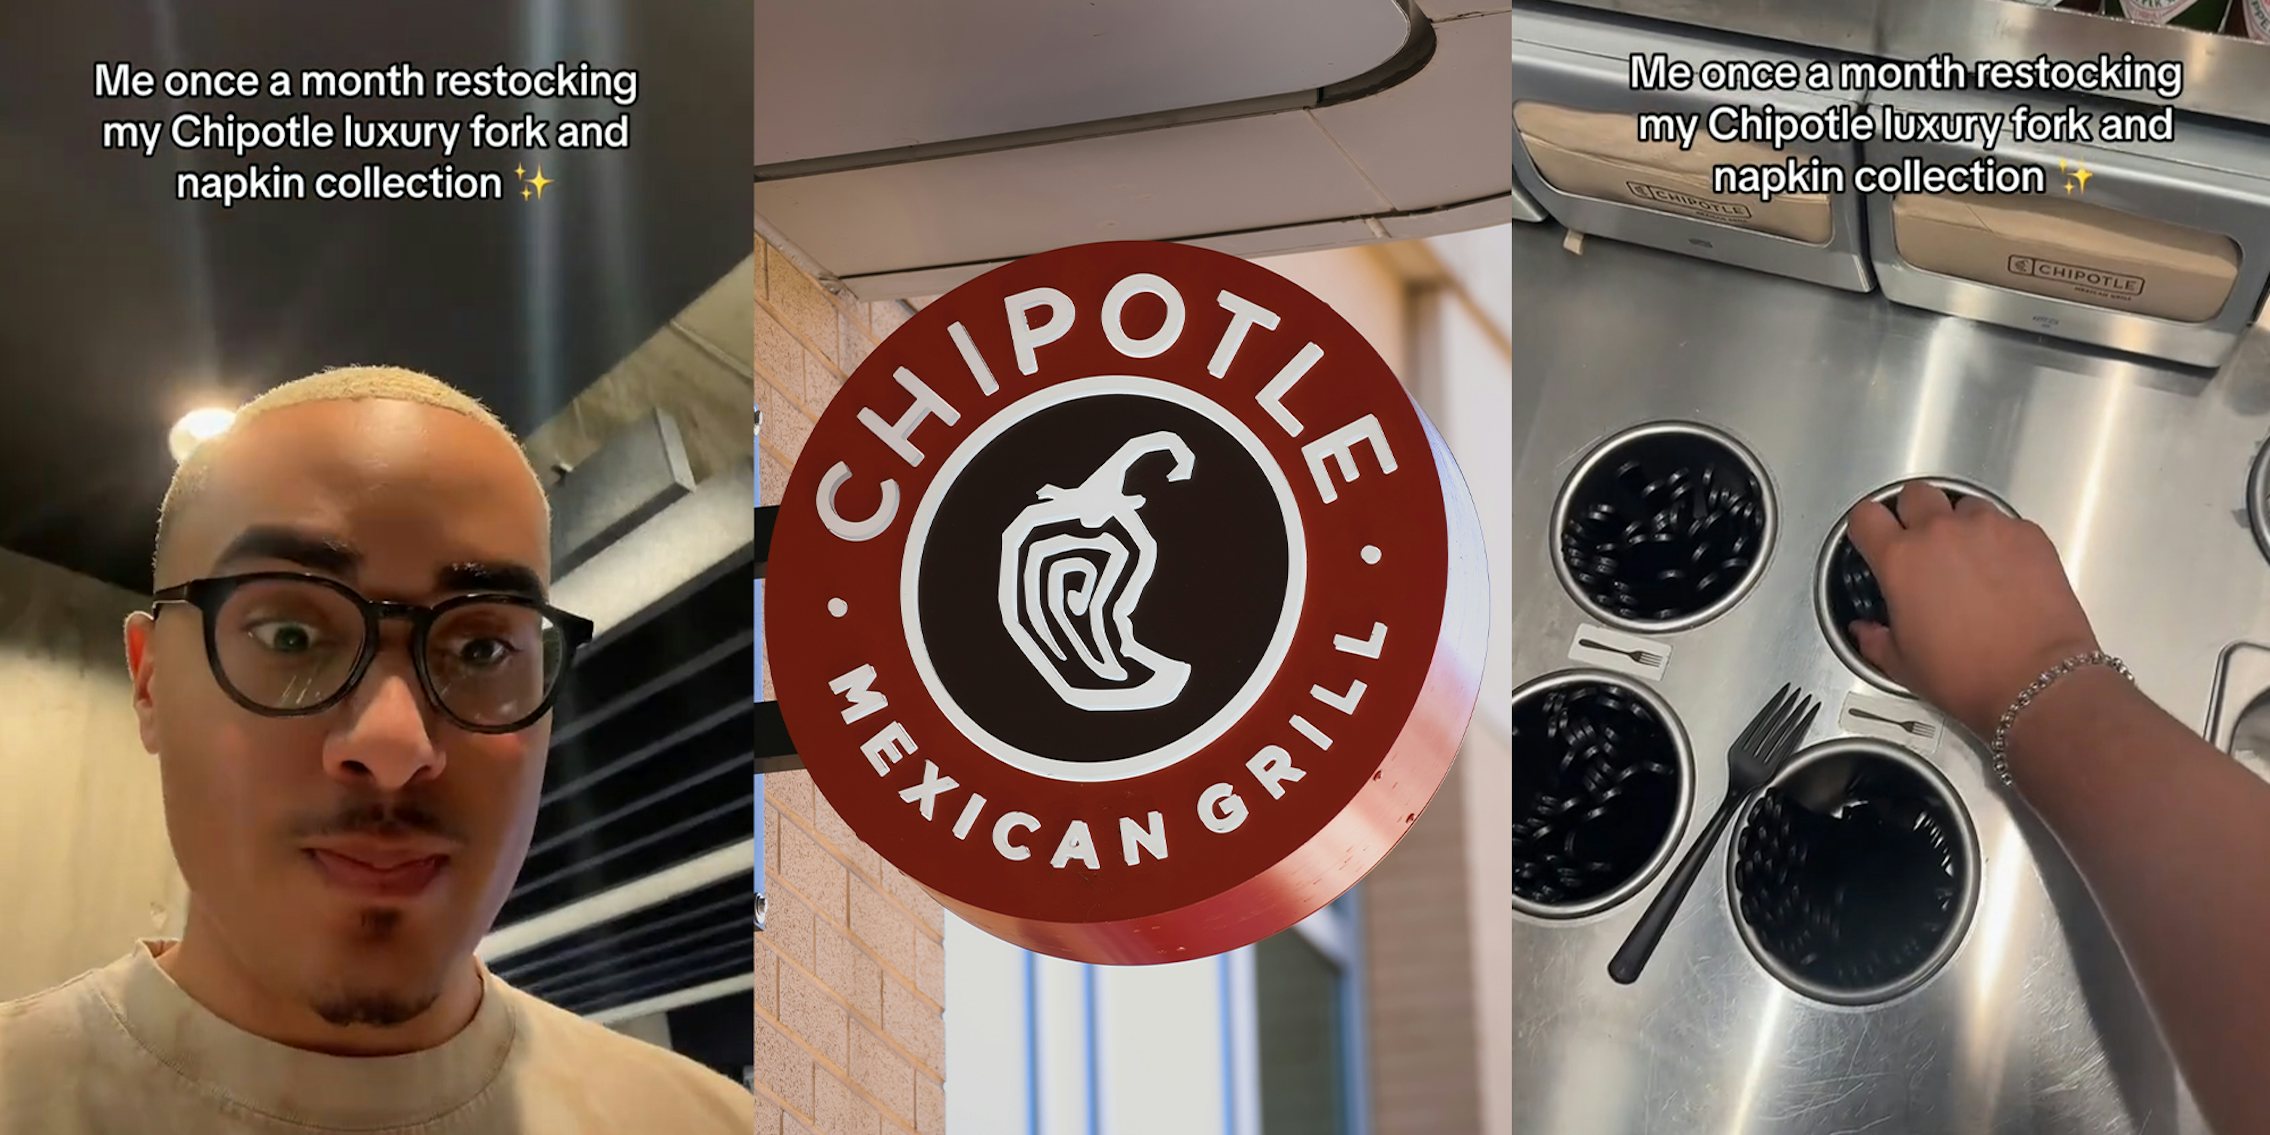 Man wearing Glasses at Chipotle; Logo of Chipotle Mexican Grill; Hand shown to be taking forks from Chipotle restaurant